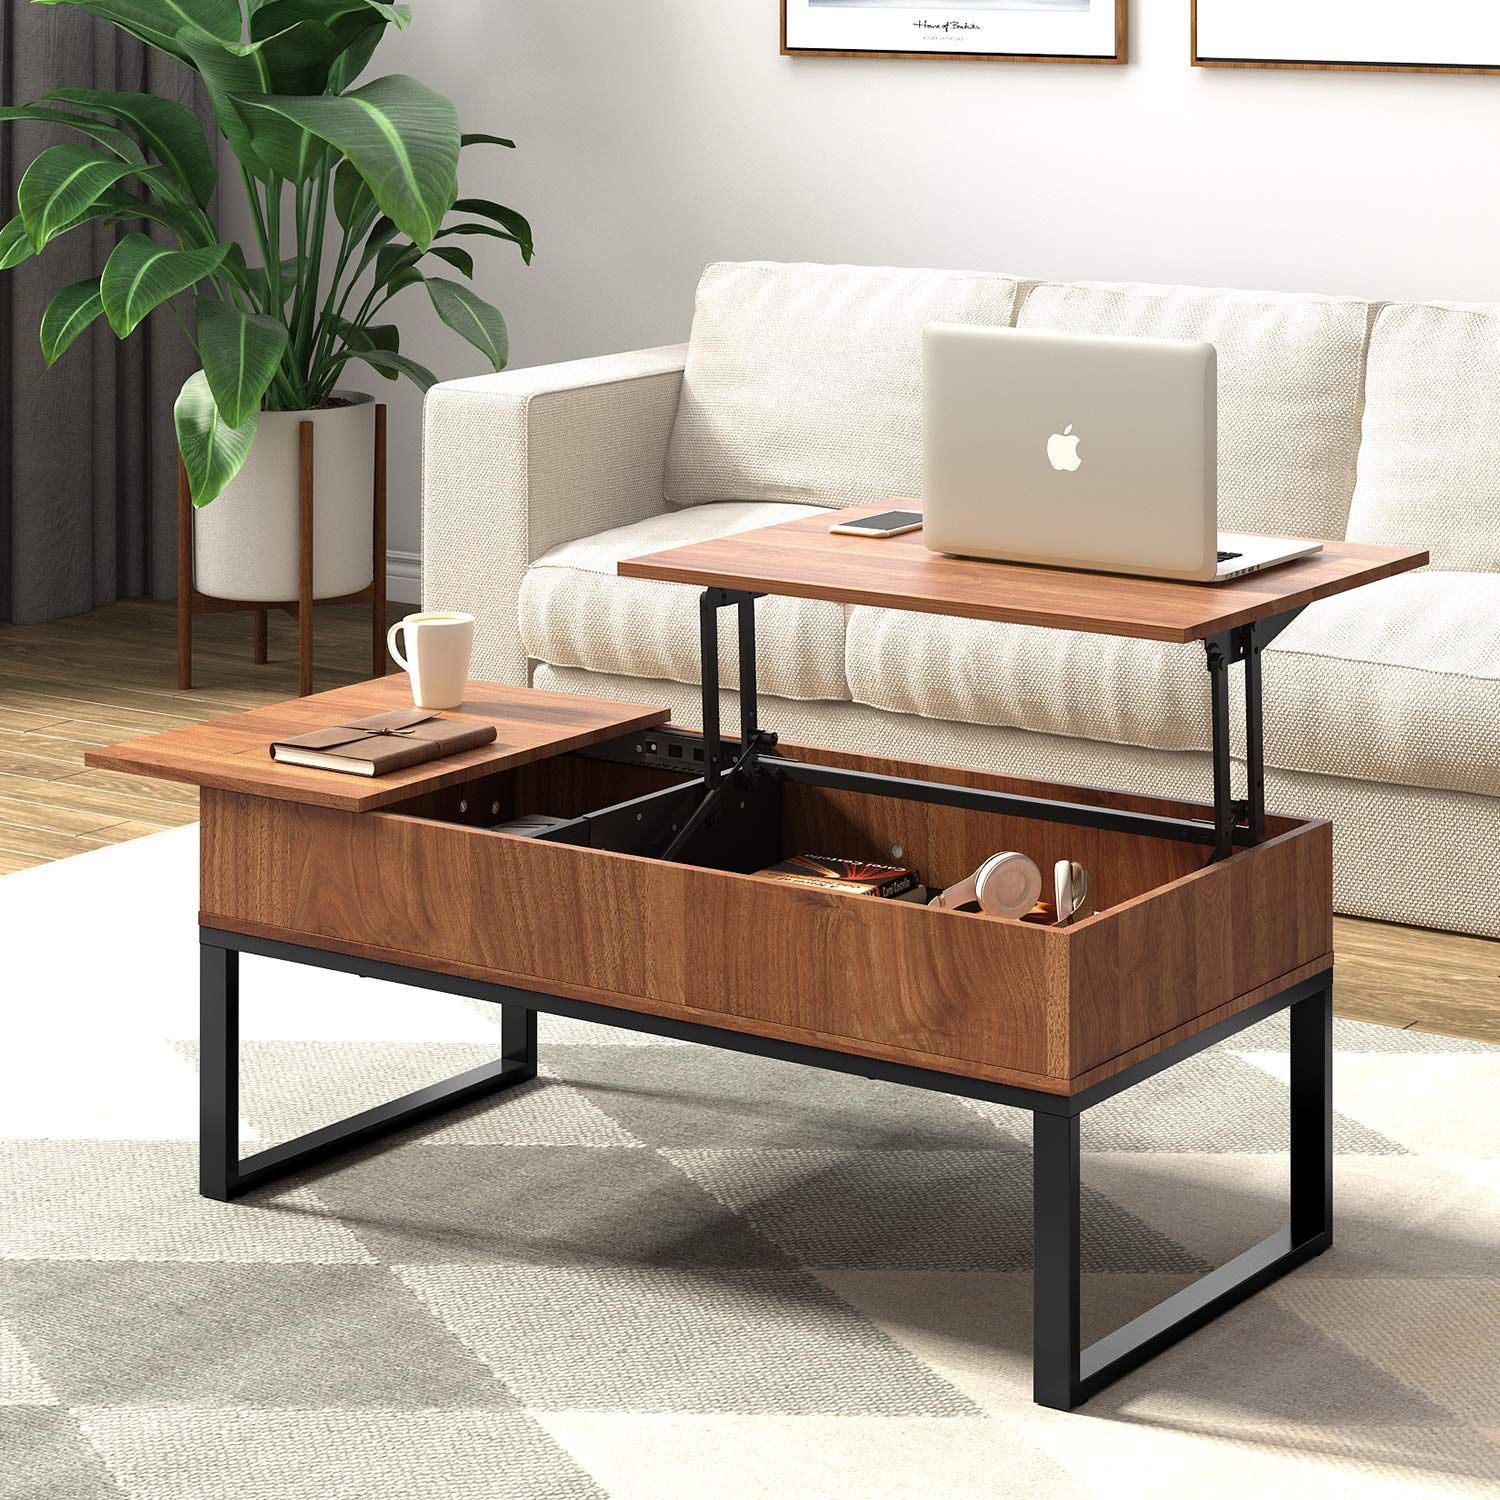 Wlive Wood Coffee Table With Adjustable Lift Top Table, Metal Frame Pertaining To Lift Top Coffee Tables With Hidden Storage Compartments (Photo 15 of 15)